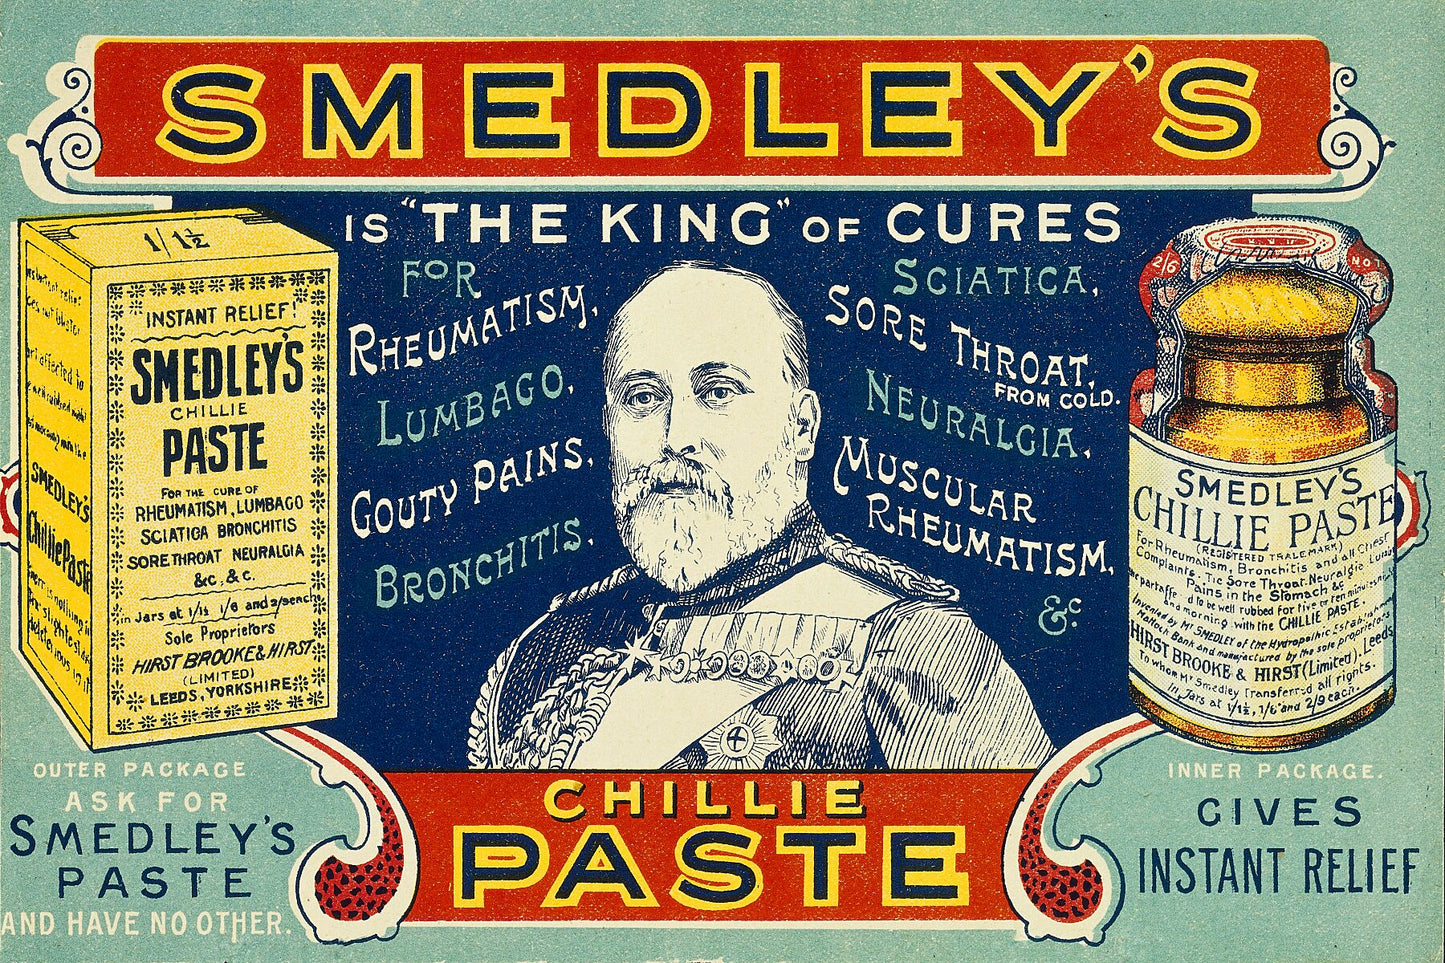 Smedley's Chillie Paste is 'The King' of Cures - 1901